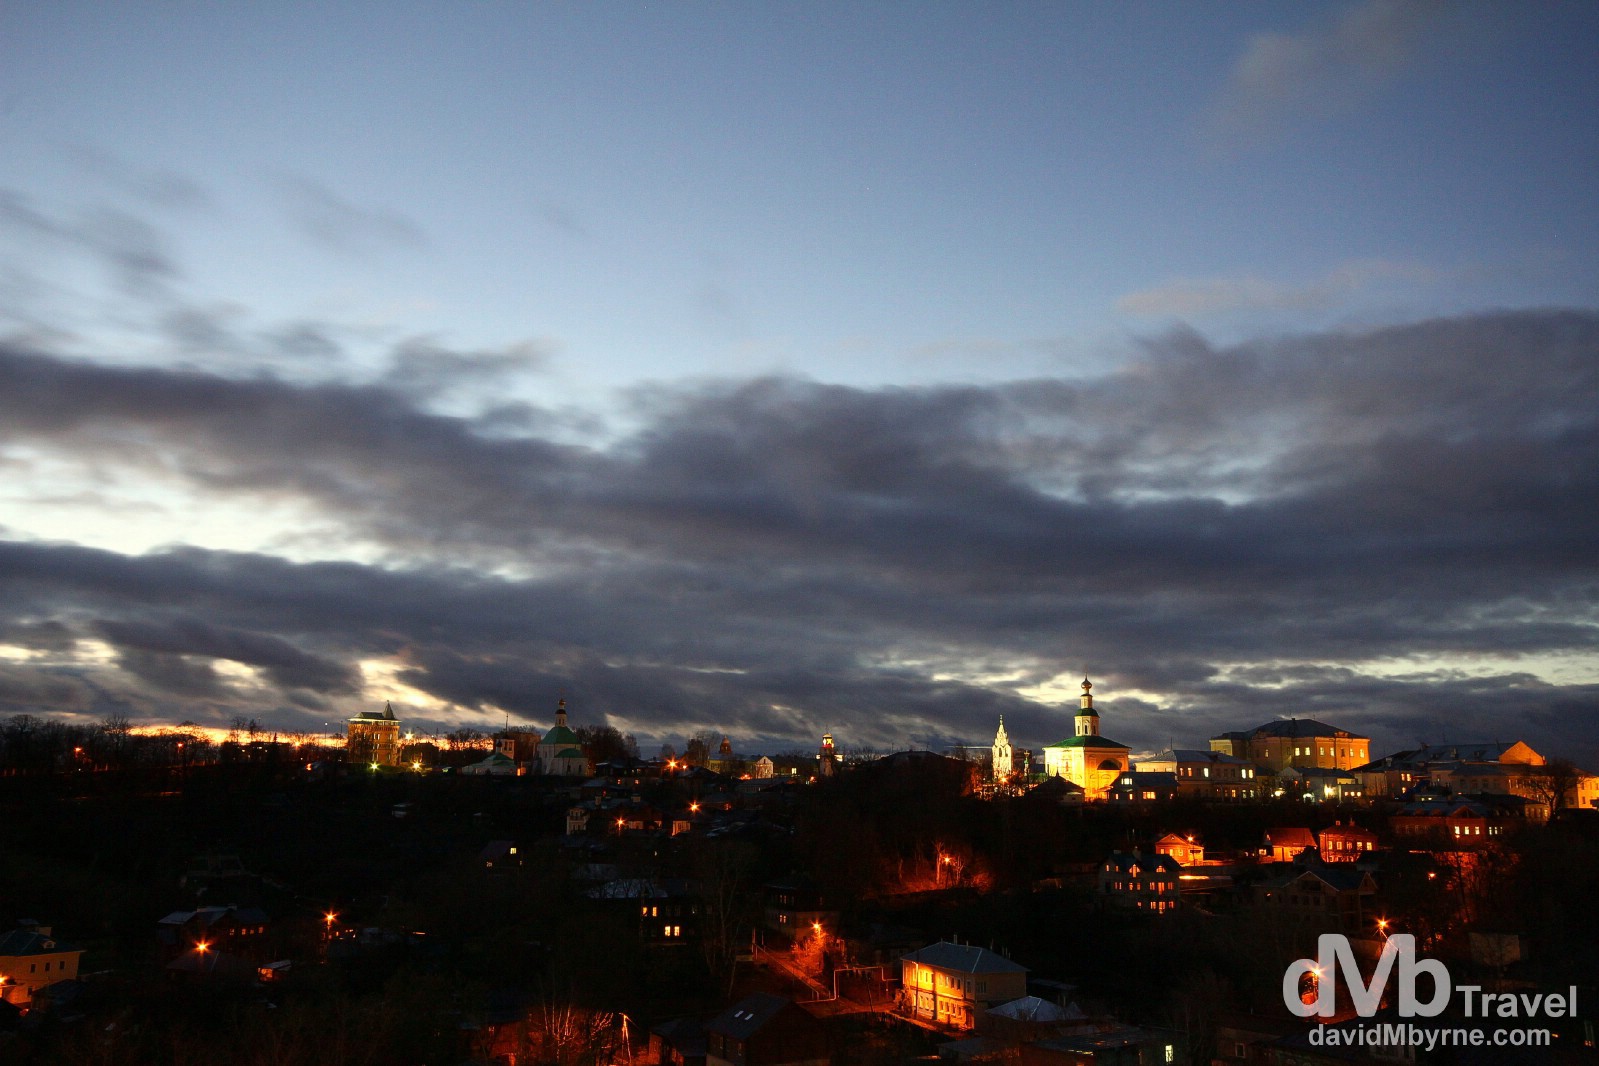 Churches dot the hills of Vladimir in a picture taken shortly after sunset. Vladimir, Russia. November 16th 2012.